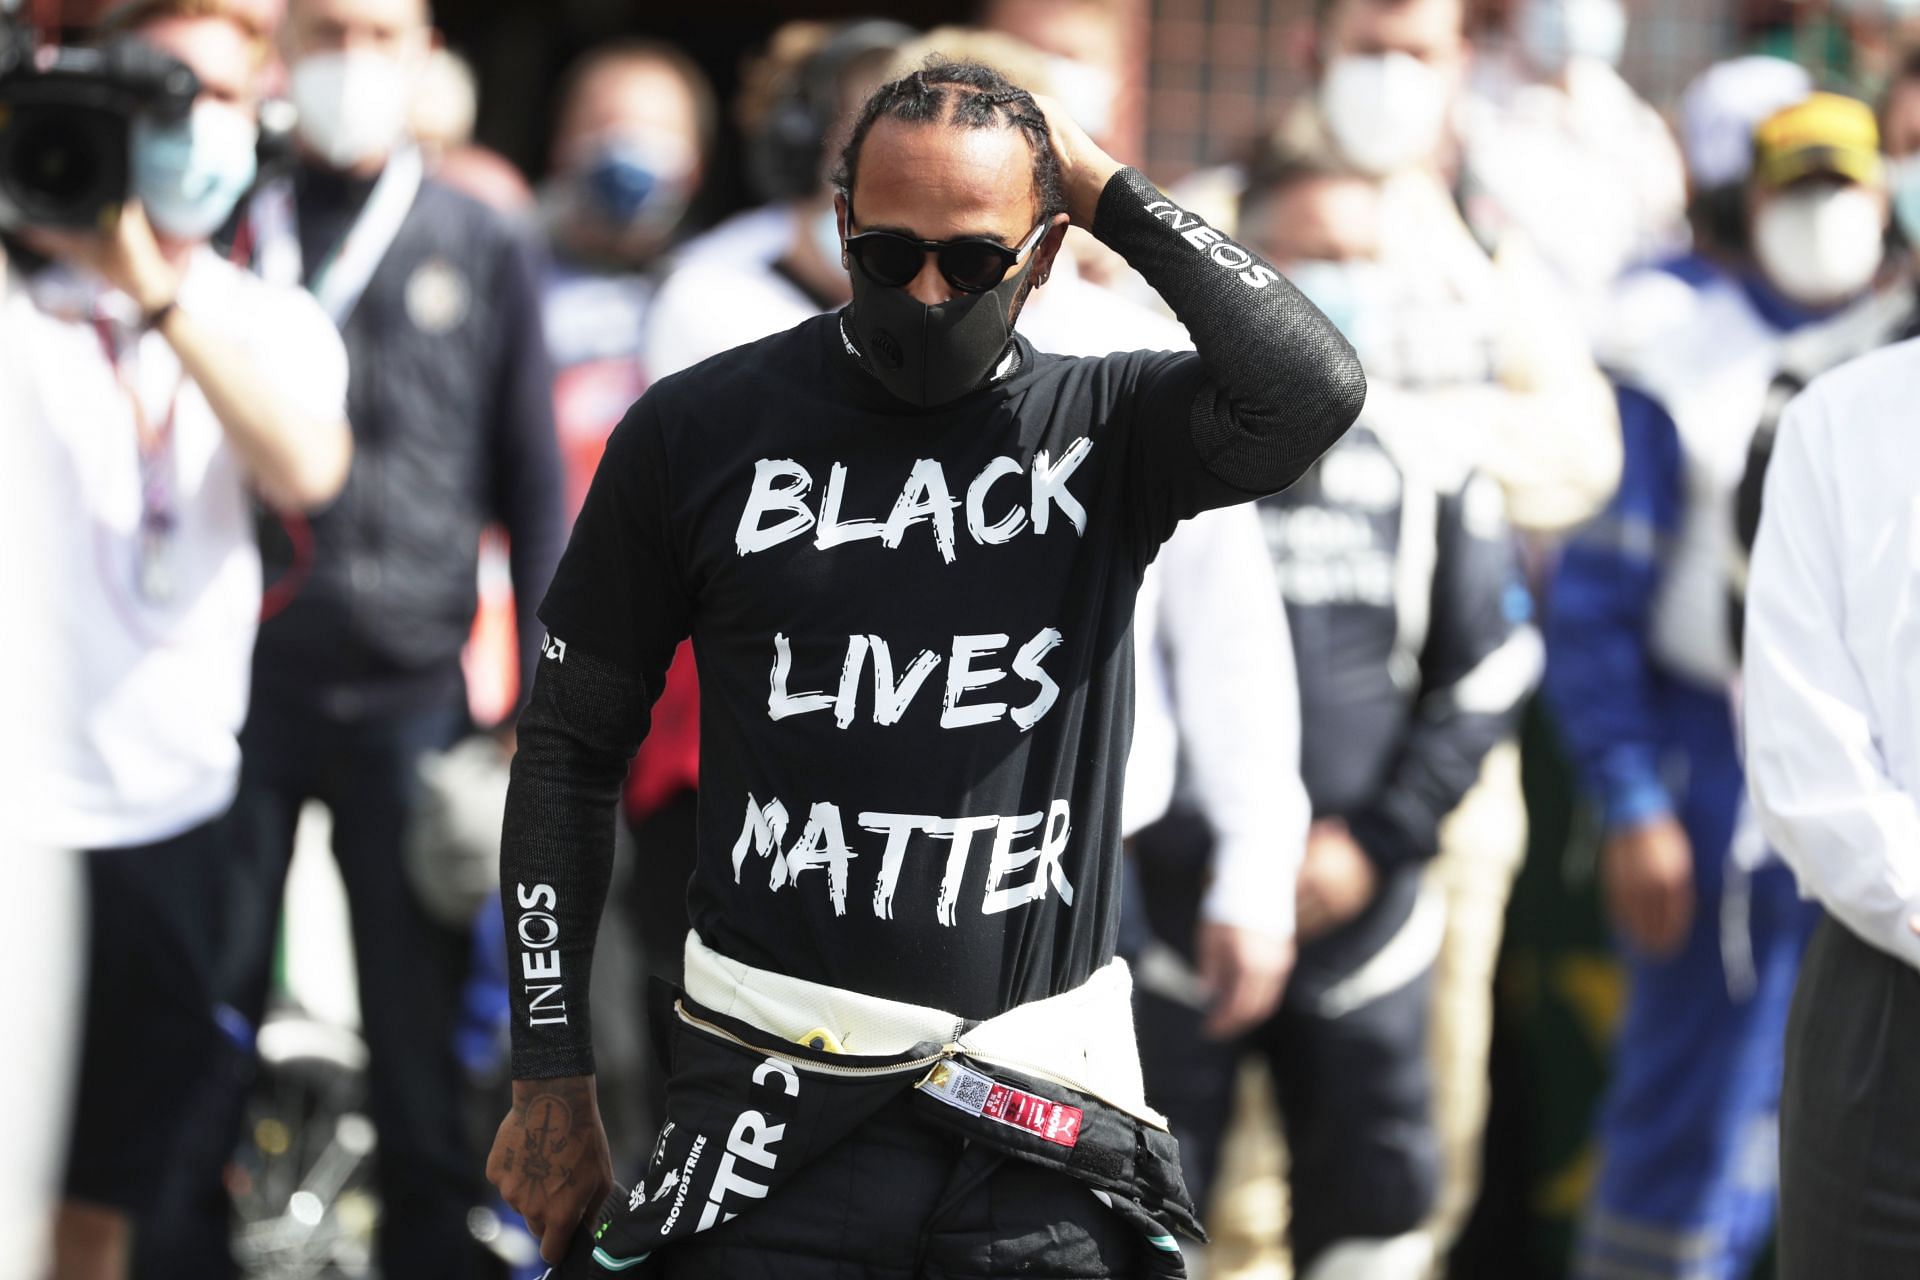 Lewis Hamilton supports the Black Lives Matter movement at the F1 Grand Prix of Belgium